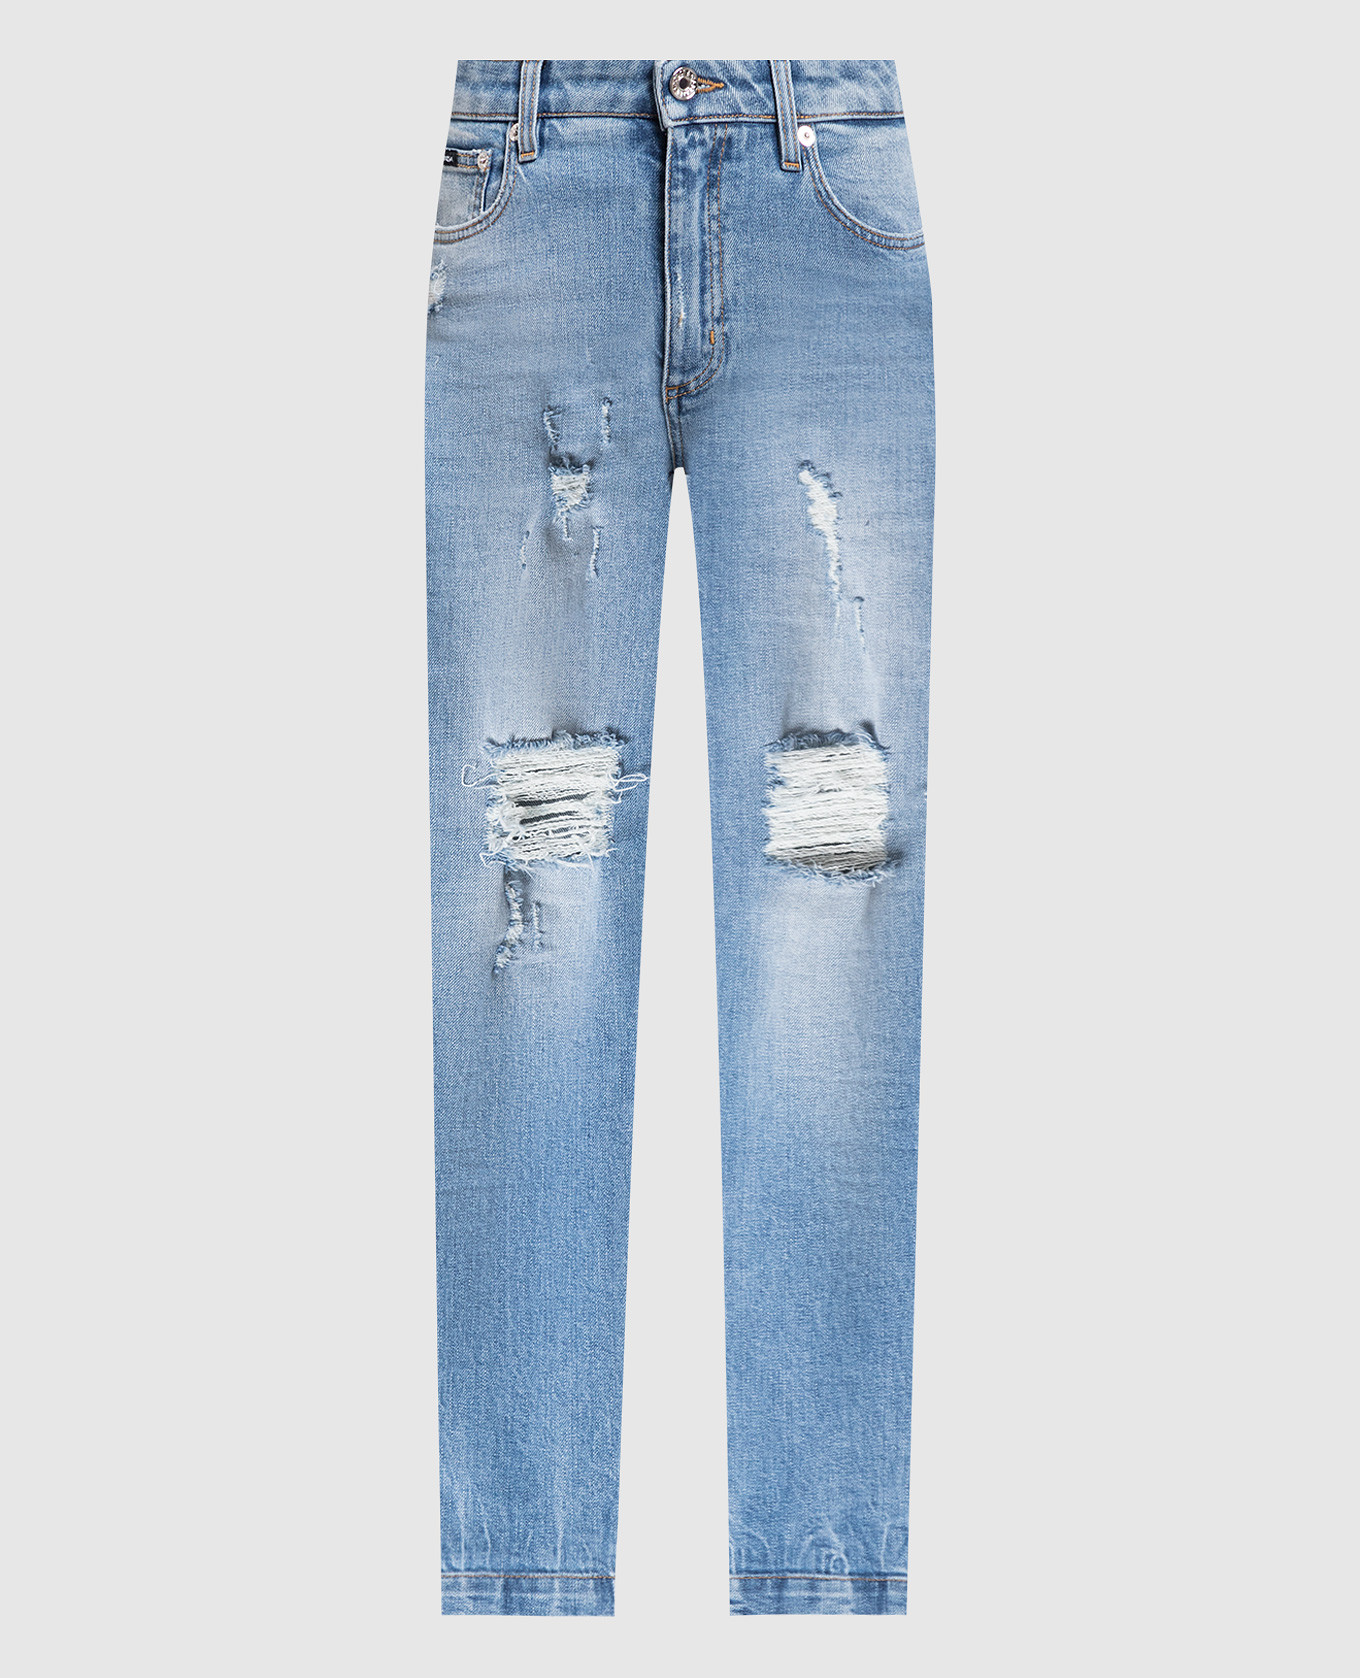 Blue Audrey jeans with slits